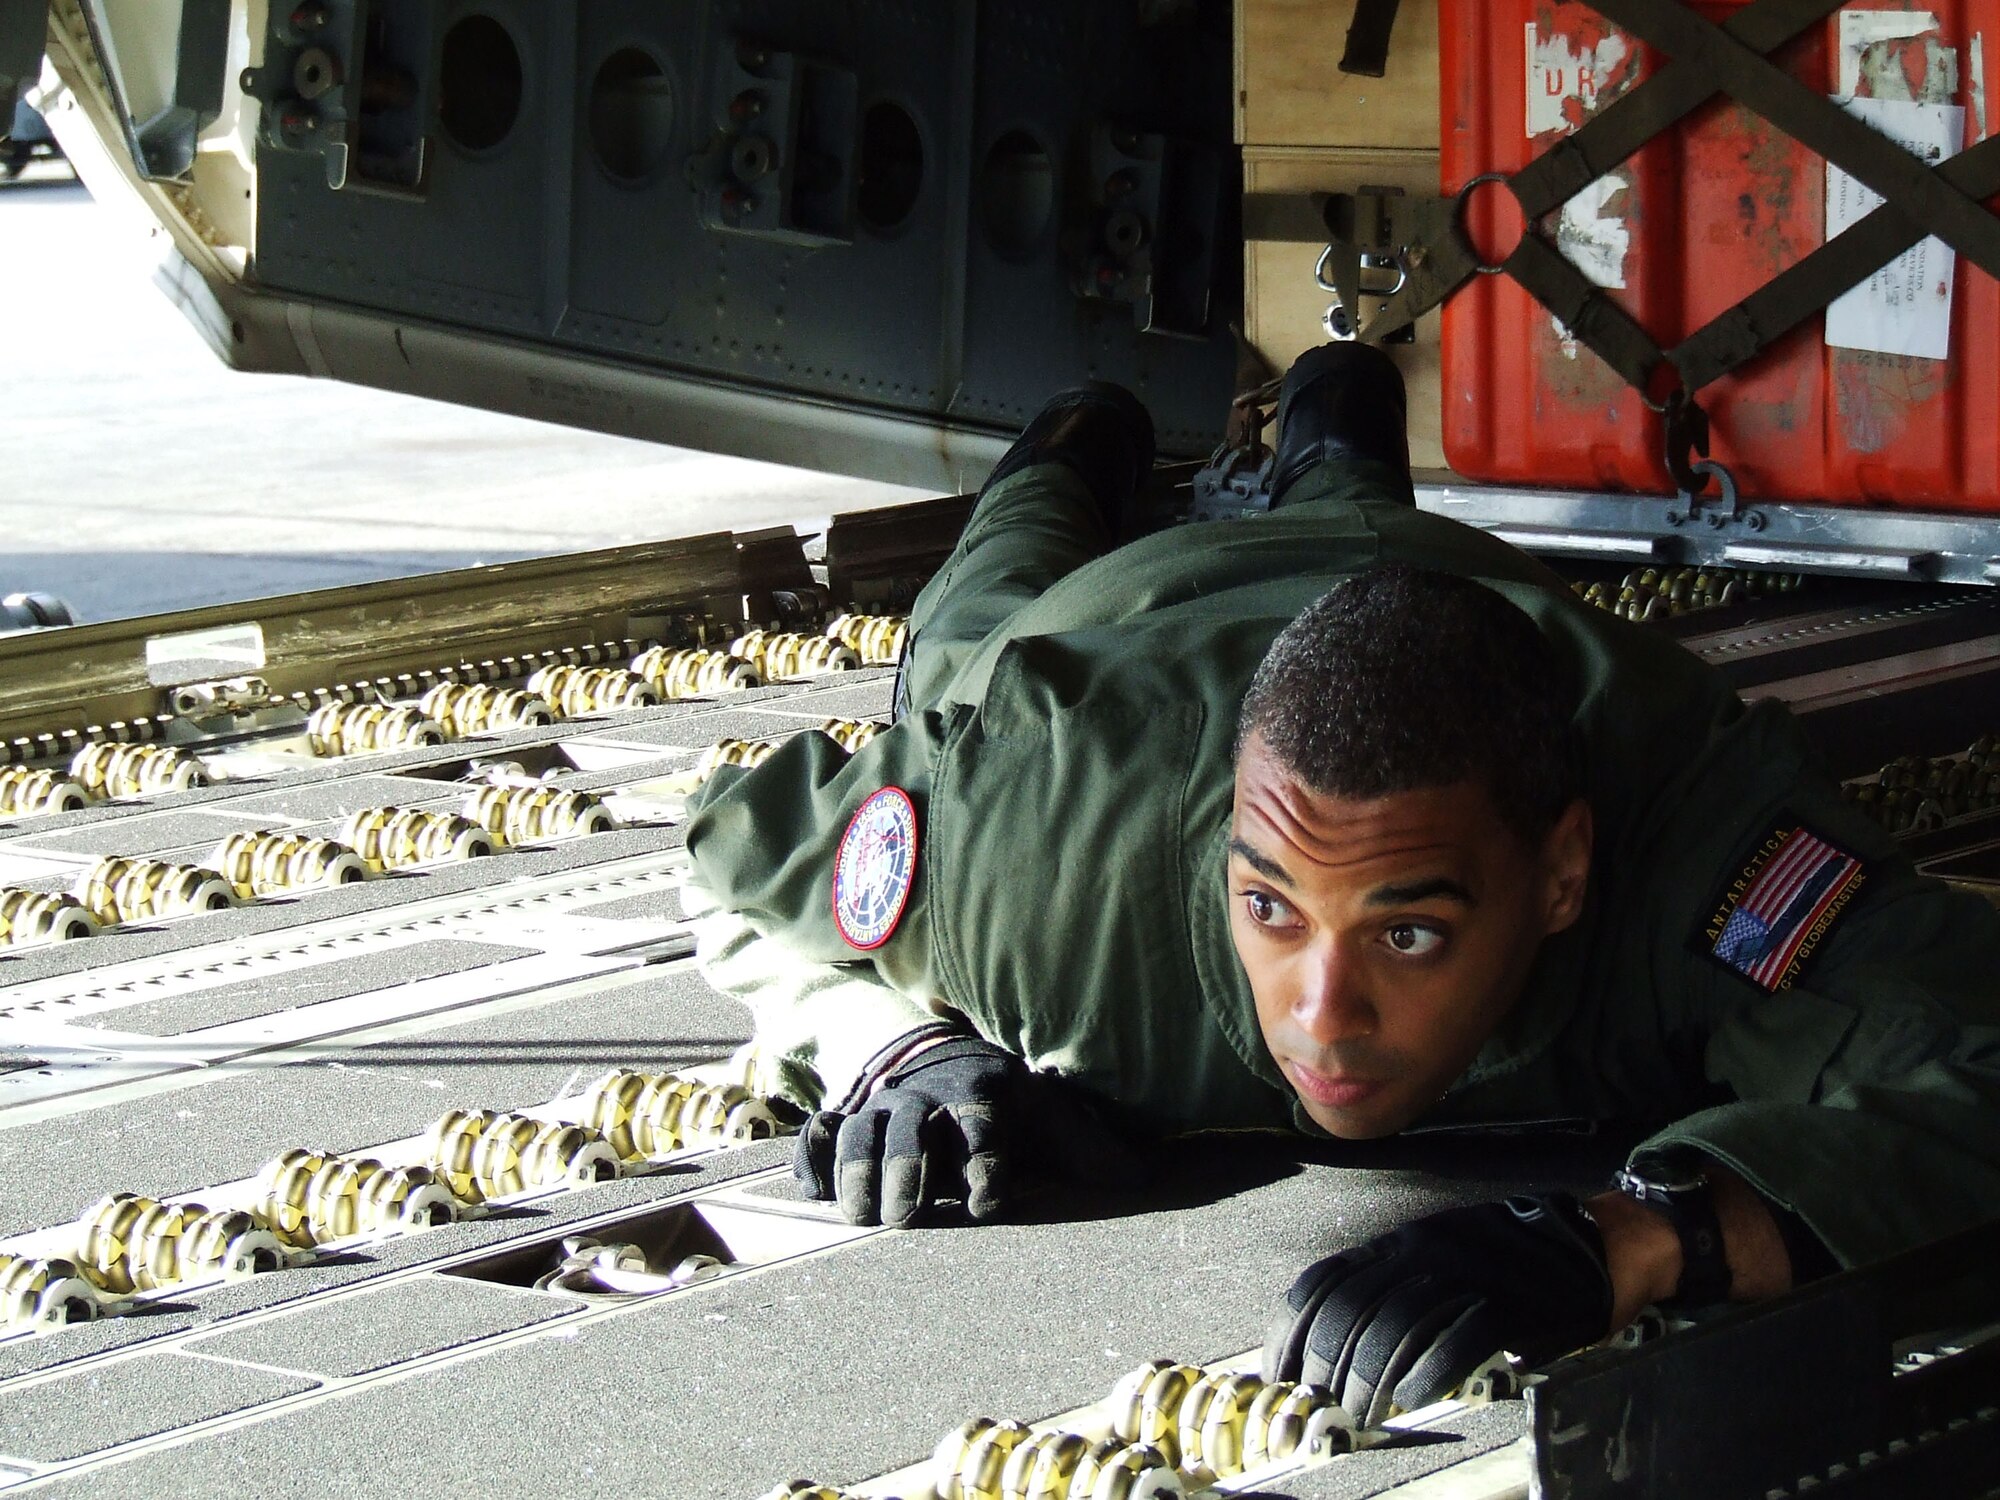 CHRISTCHURCH, New Zealand - Senior Airman Kory Williams, 8th Airlift Squadron, checks the height of a forklift pallet being loaded onto a McChord C-17 Globemaster III Nov. 14, 2006, before it takes off for the ice. U.S. Air Force photo by 1st Lt Erika Yepsen